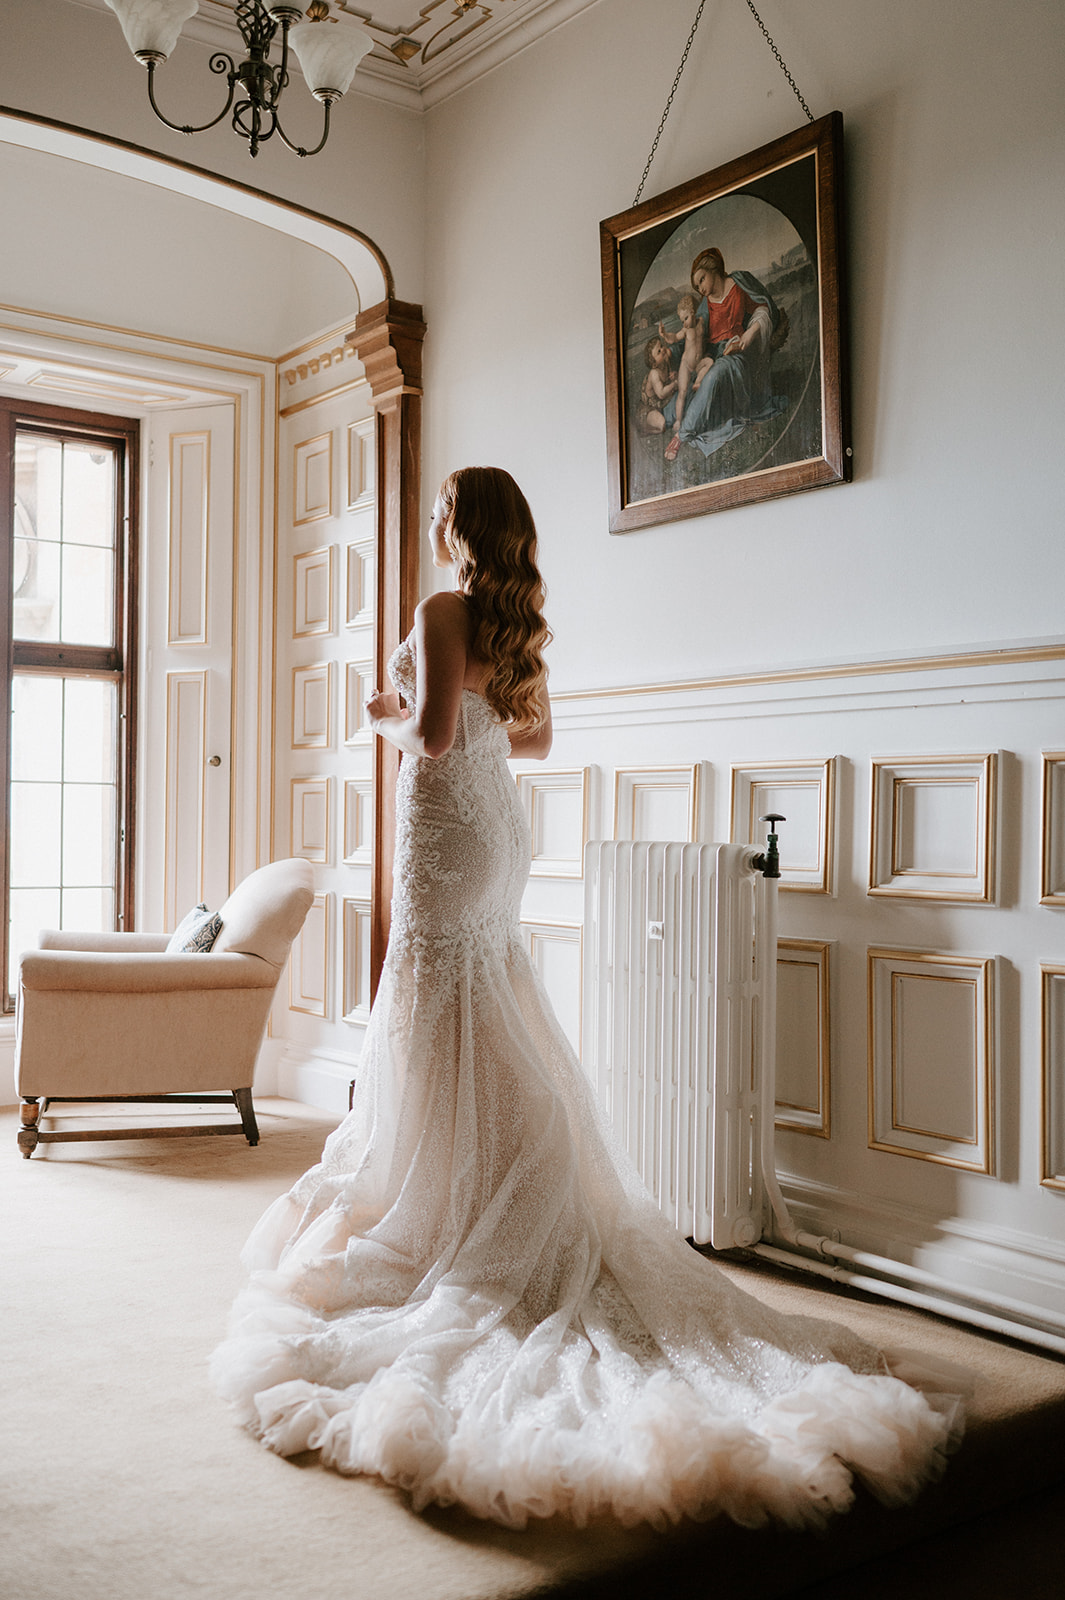 bride wearing wedding dress looking out of window at harlaxton manor